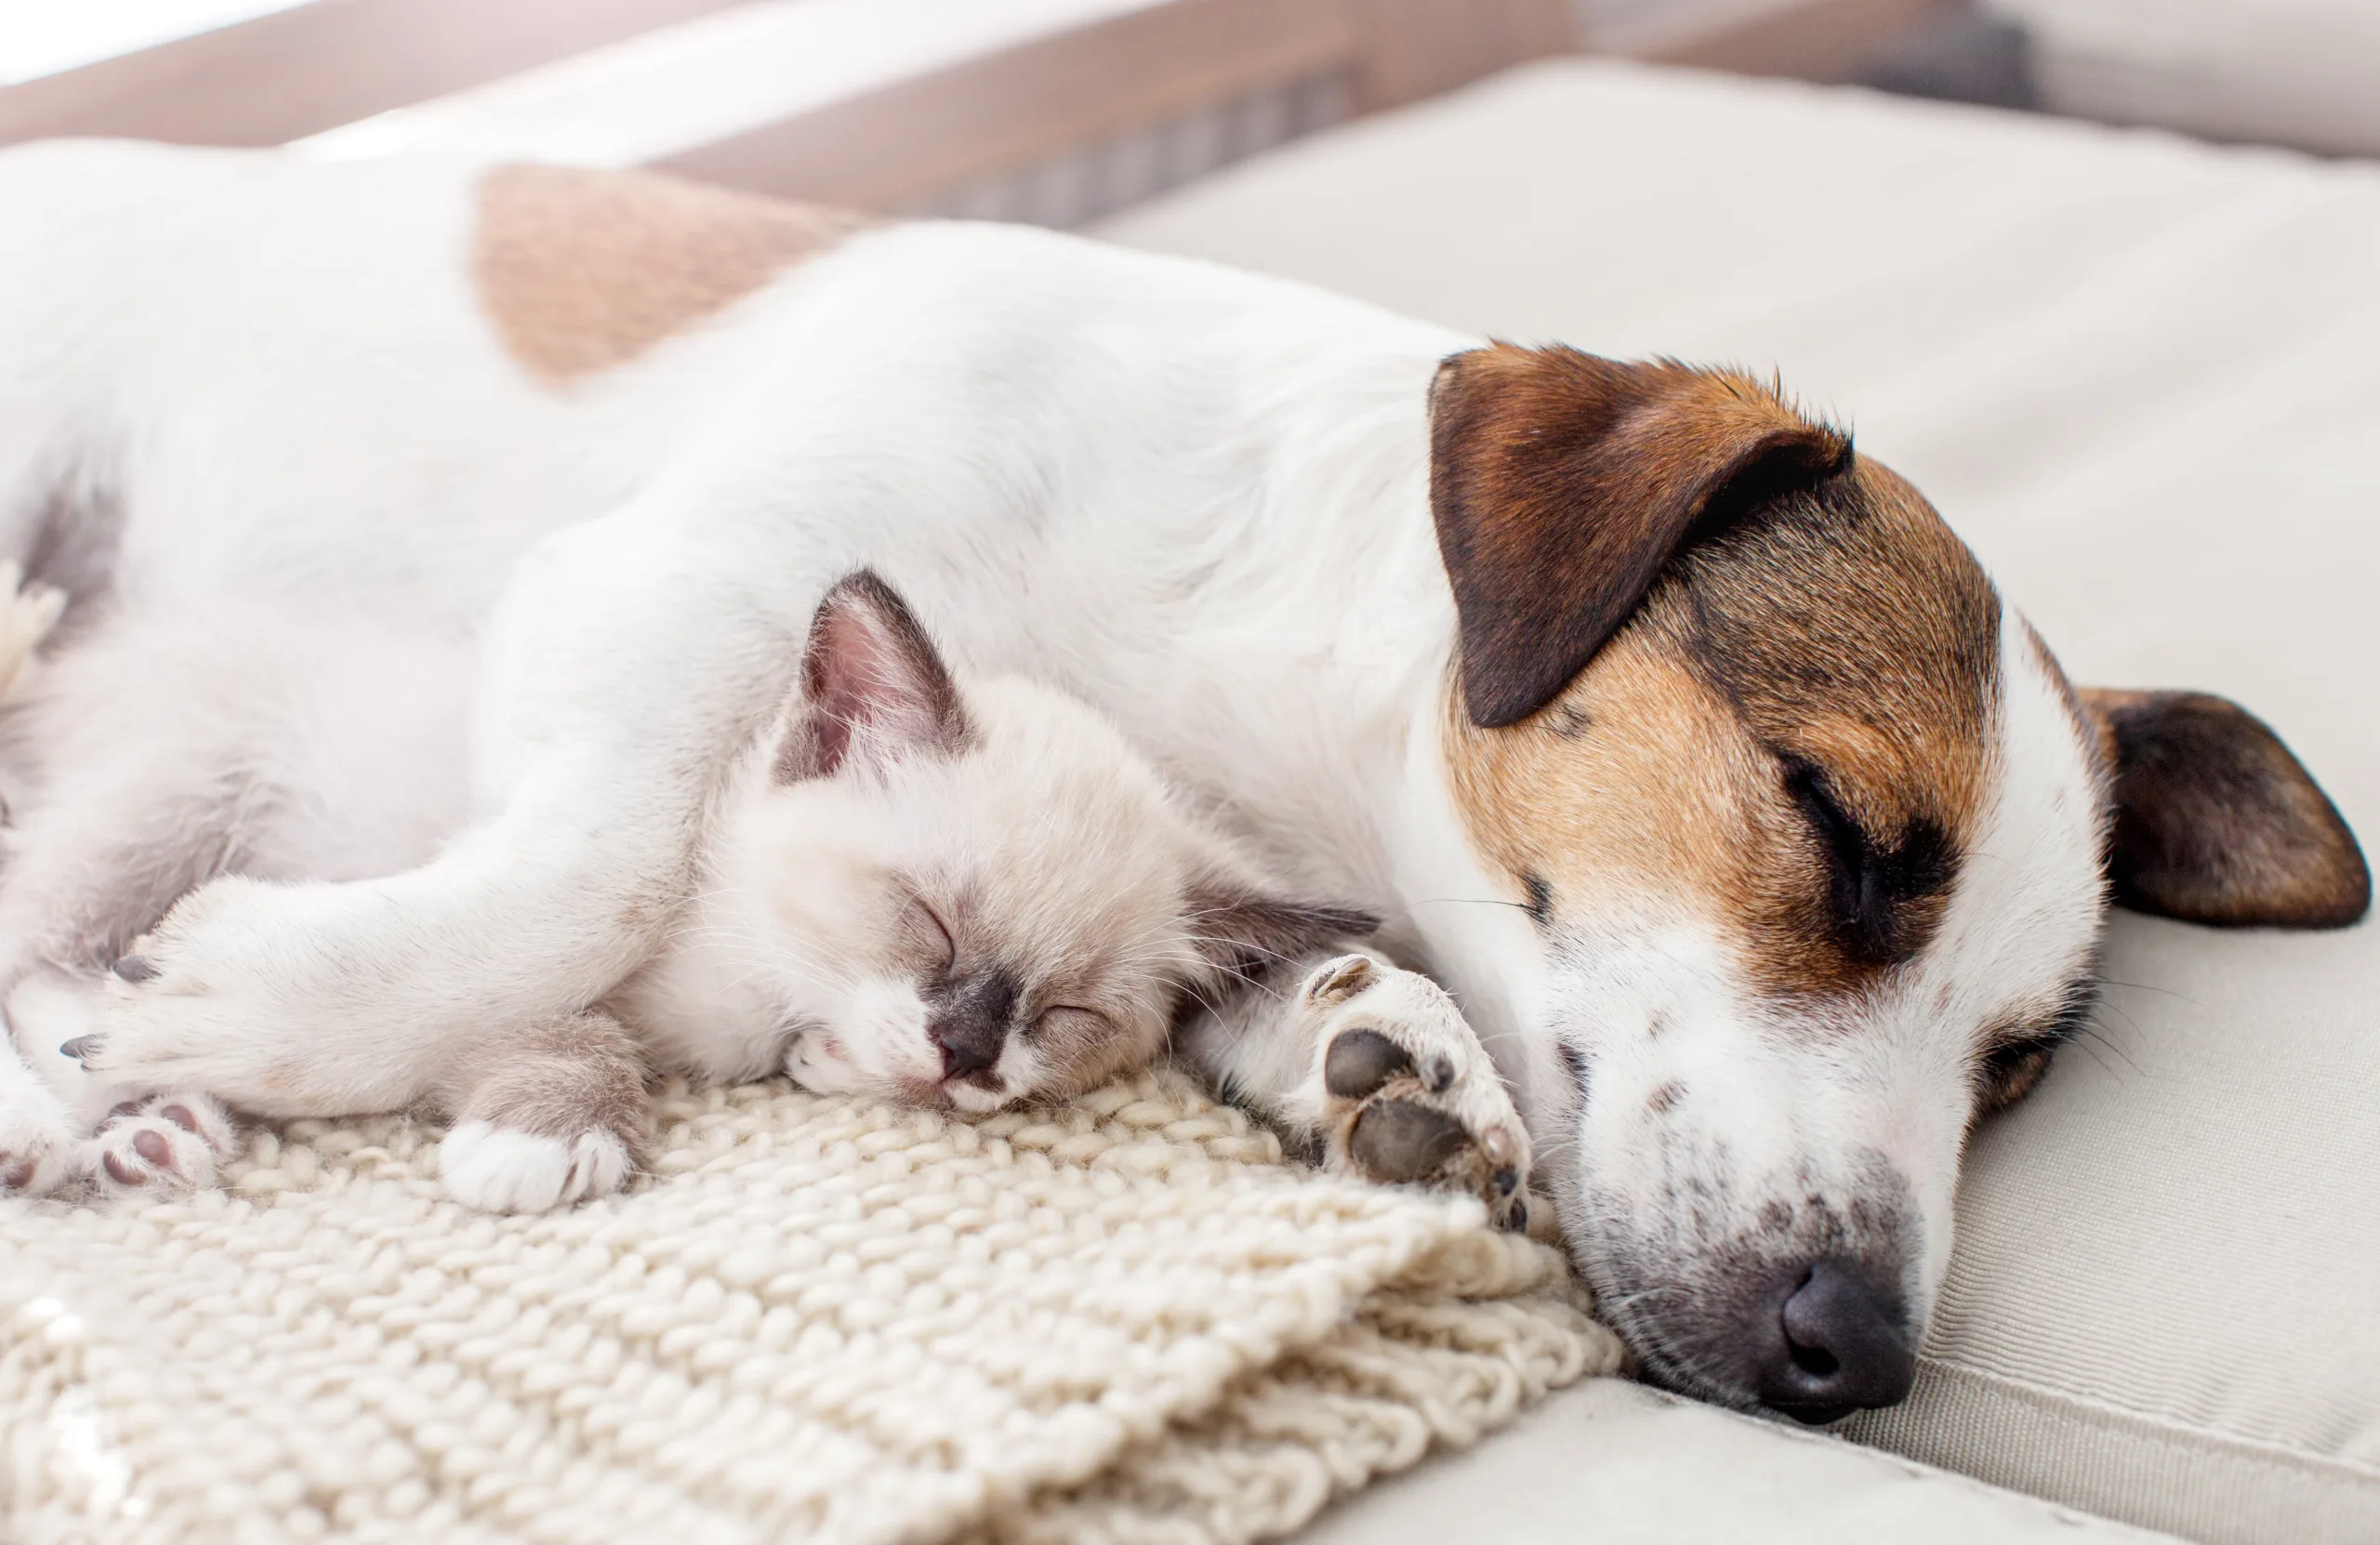 Dog and kitten sleeping on a couch in the living room, white light and airy photo.